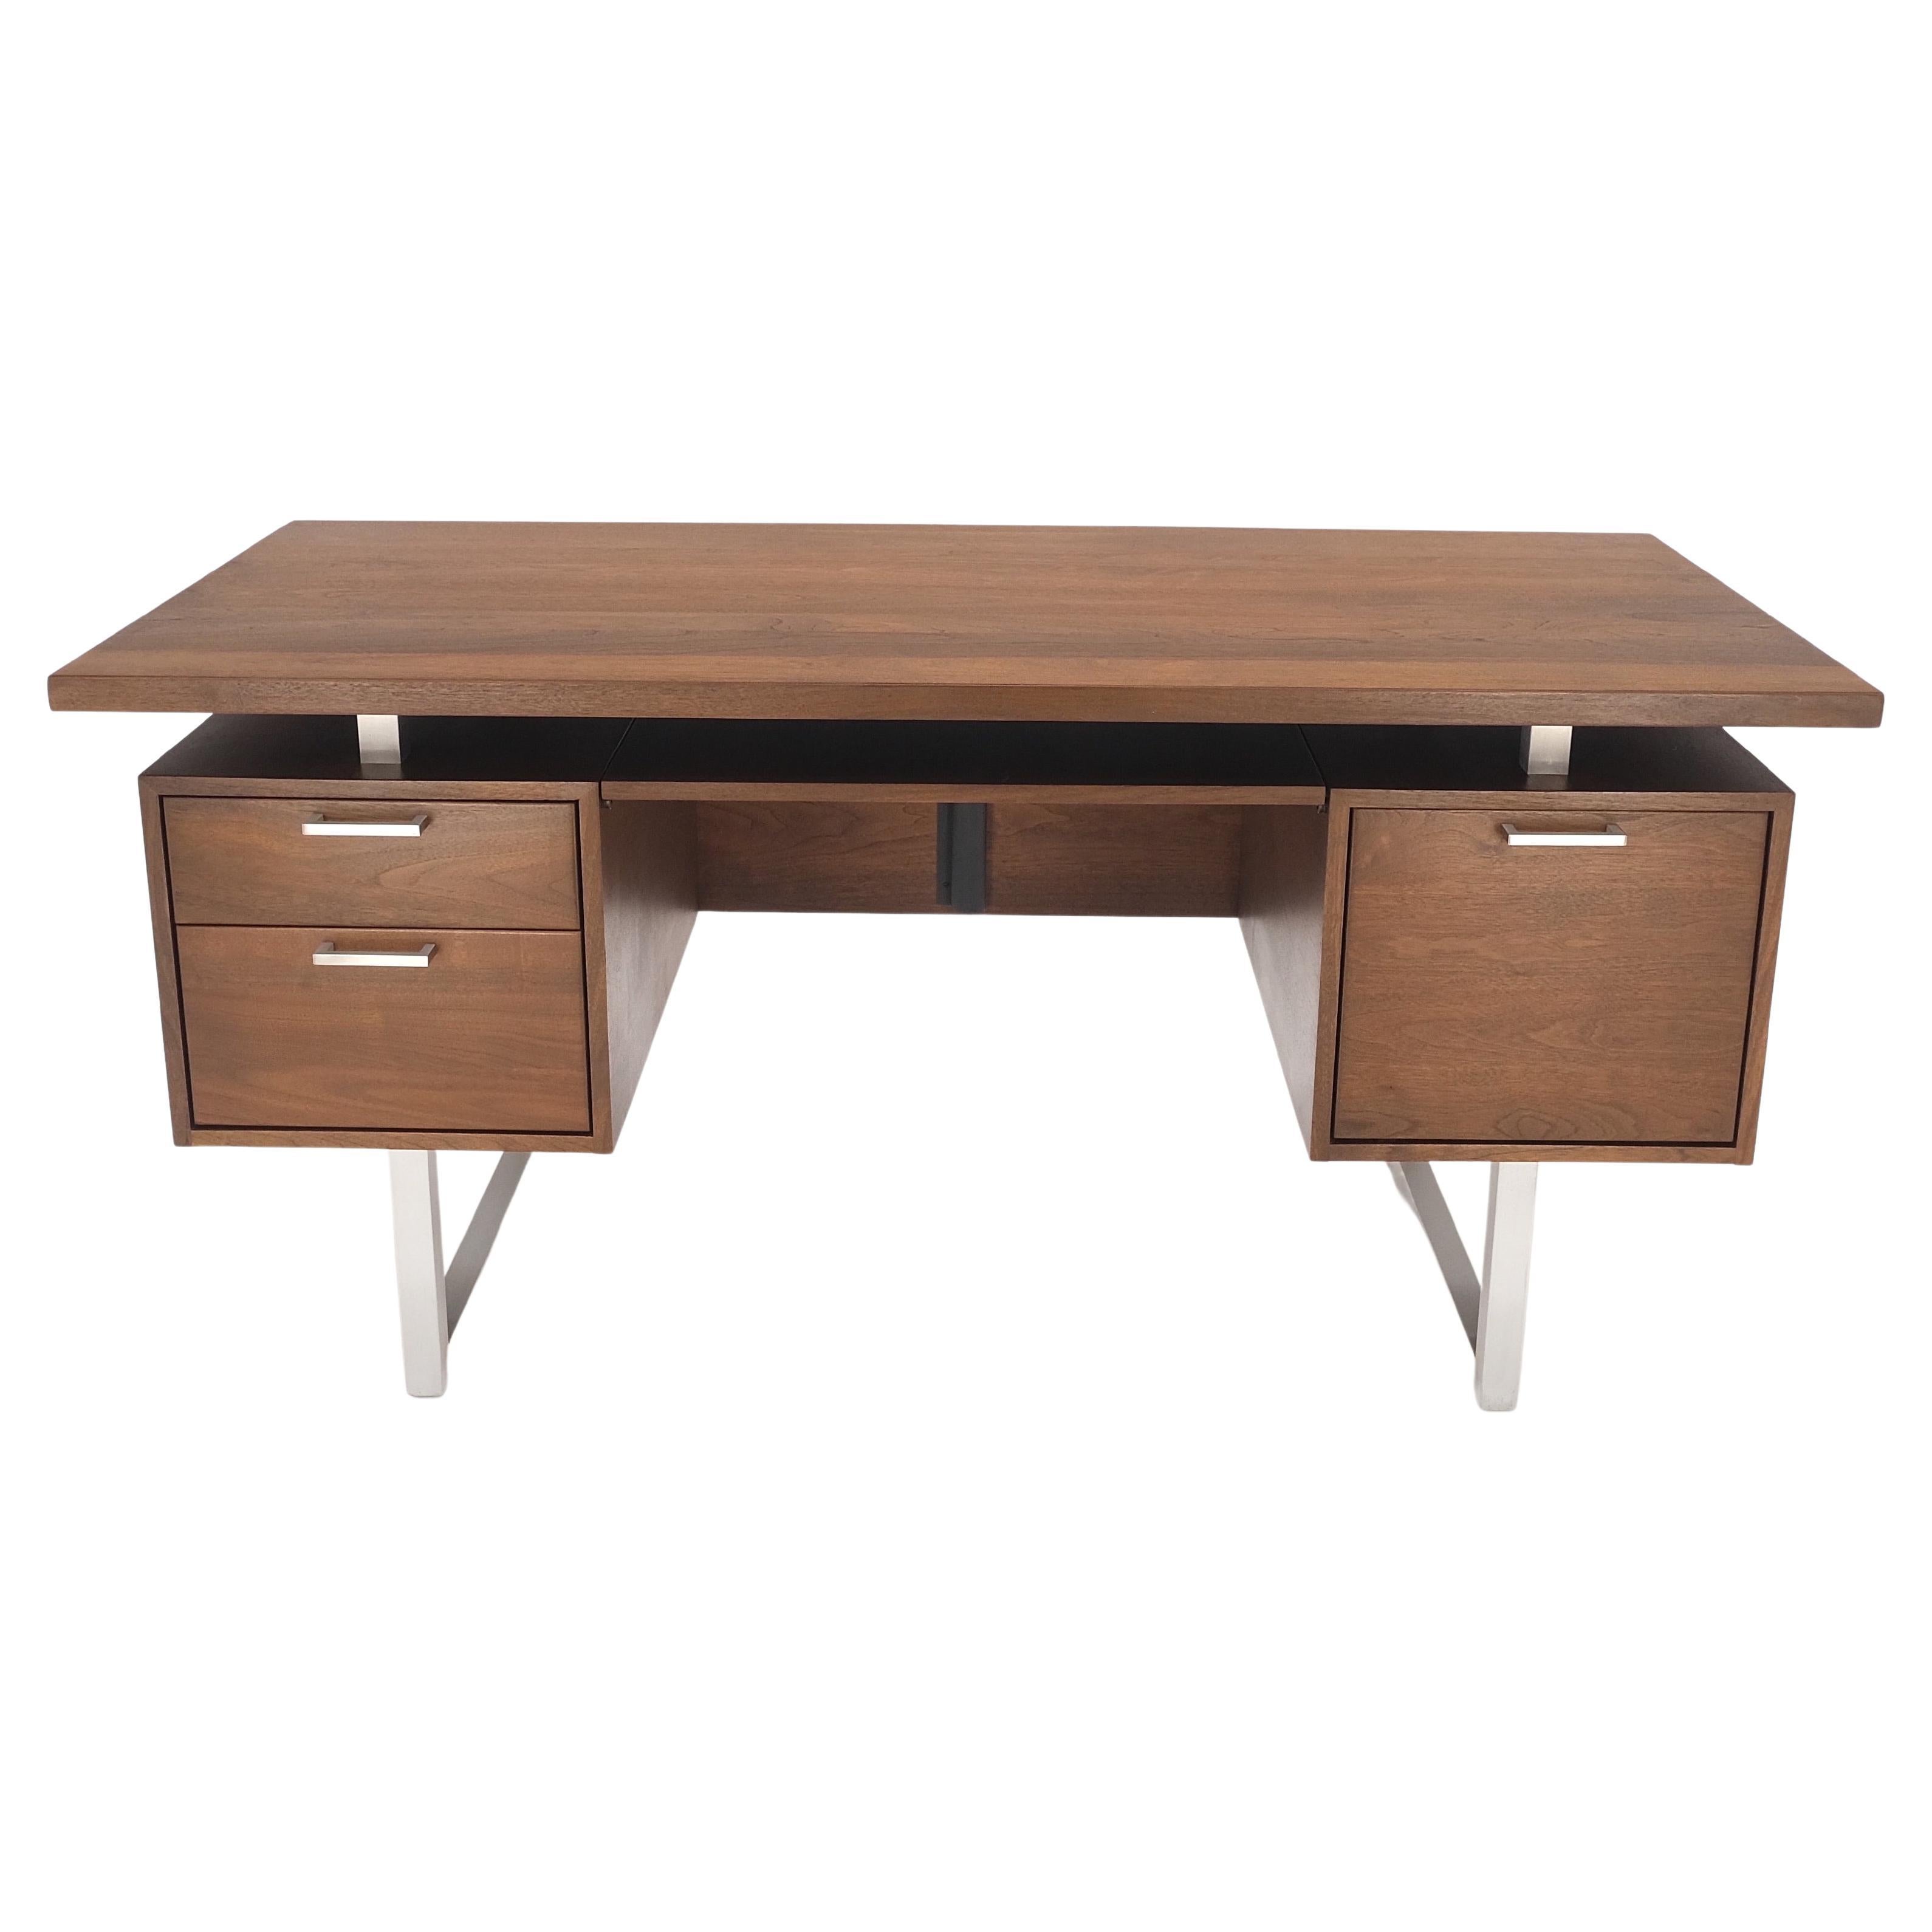 Solid Walnut Mid-Century Modern Floating Top All Restored Desk Table Mint! For Sale